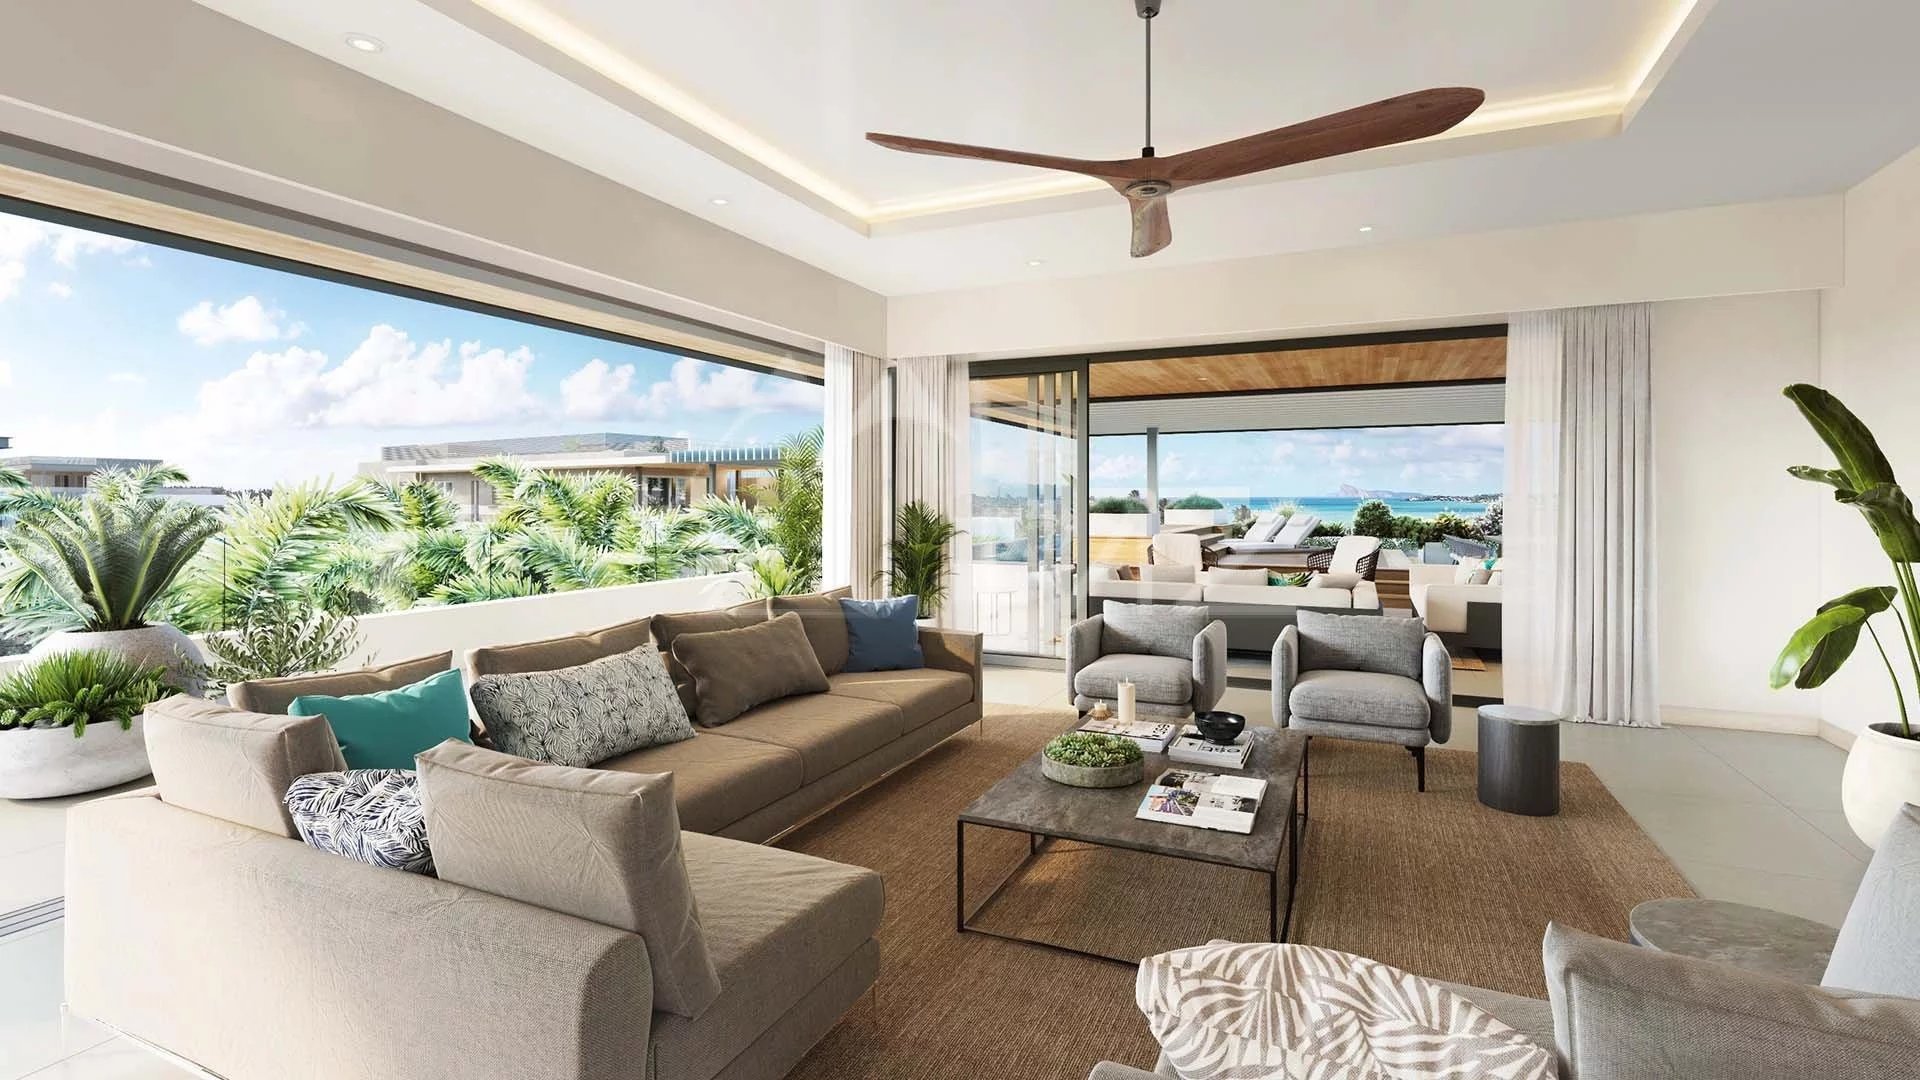 Mauritius - Mont Choisy - 4 bedrooms penthouse with panoramic views